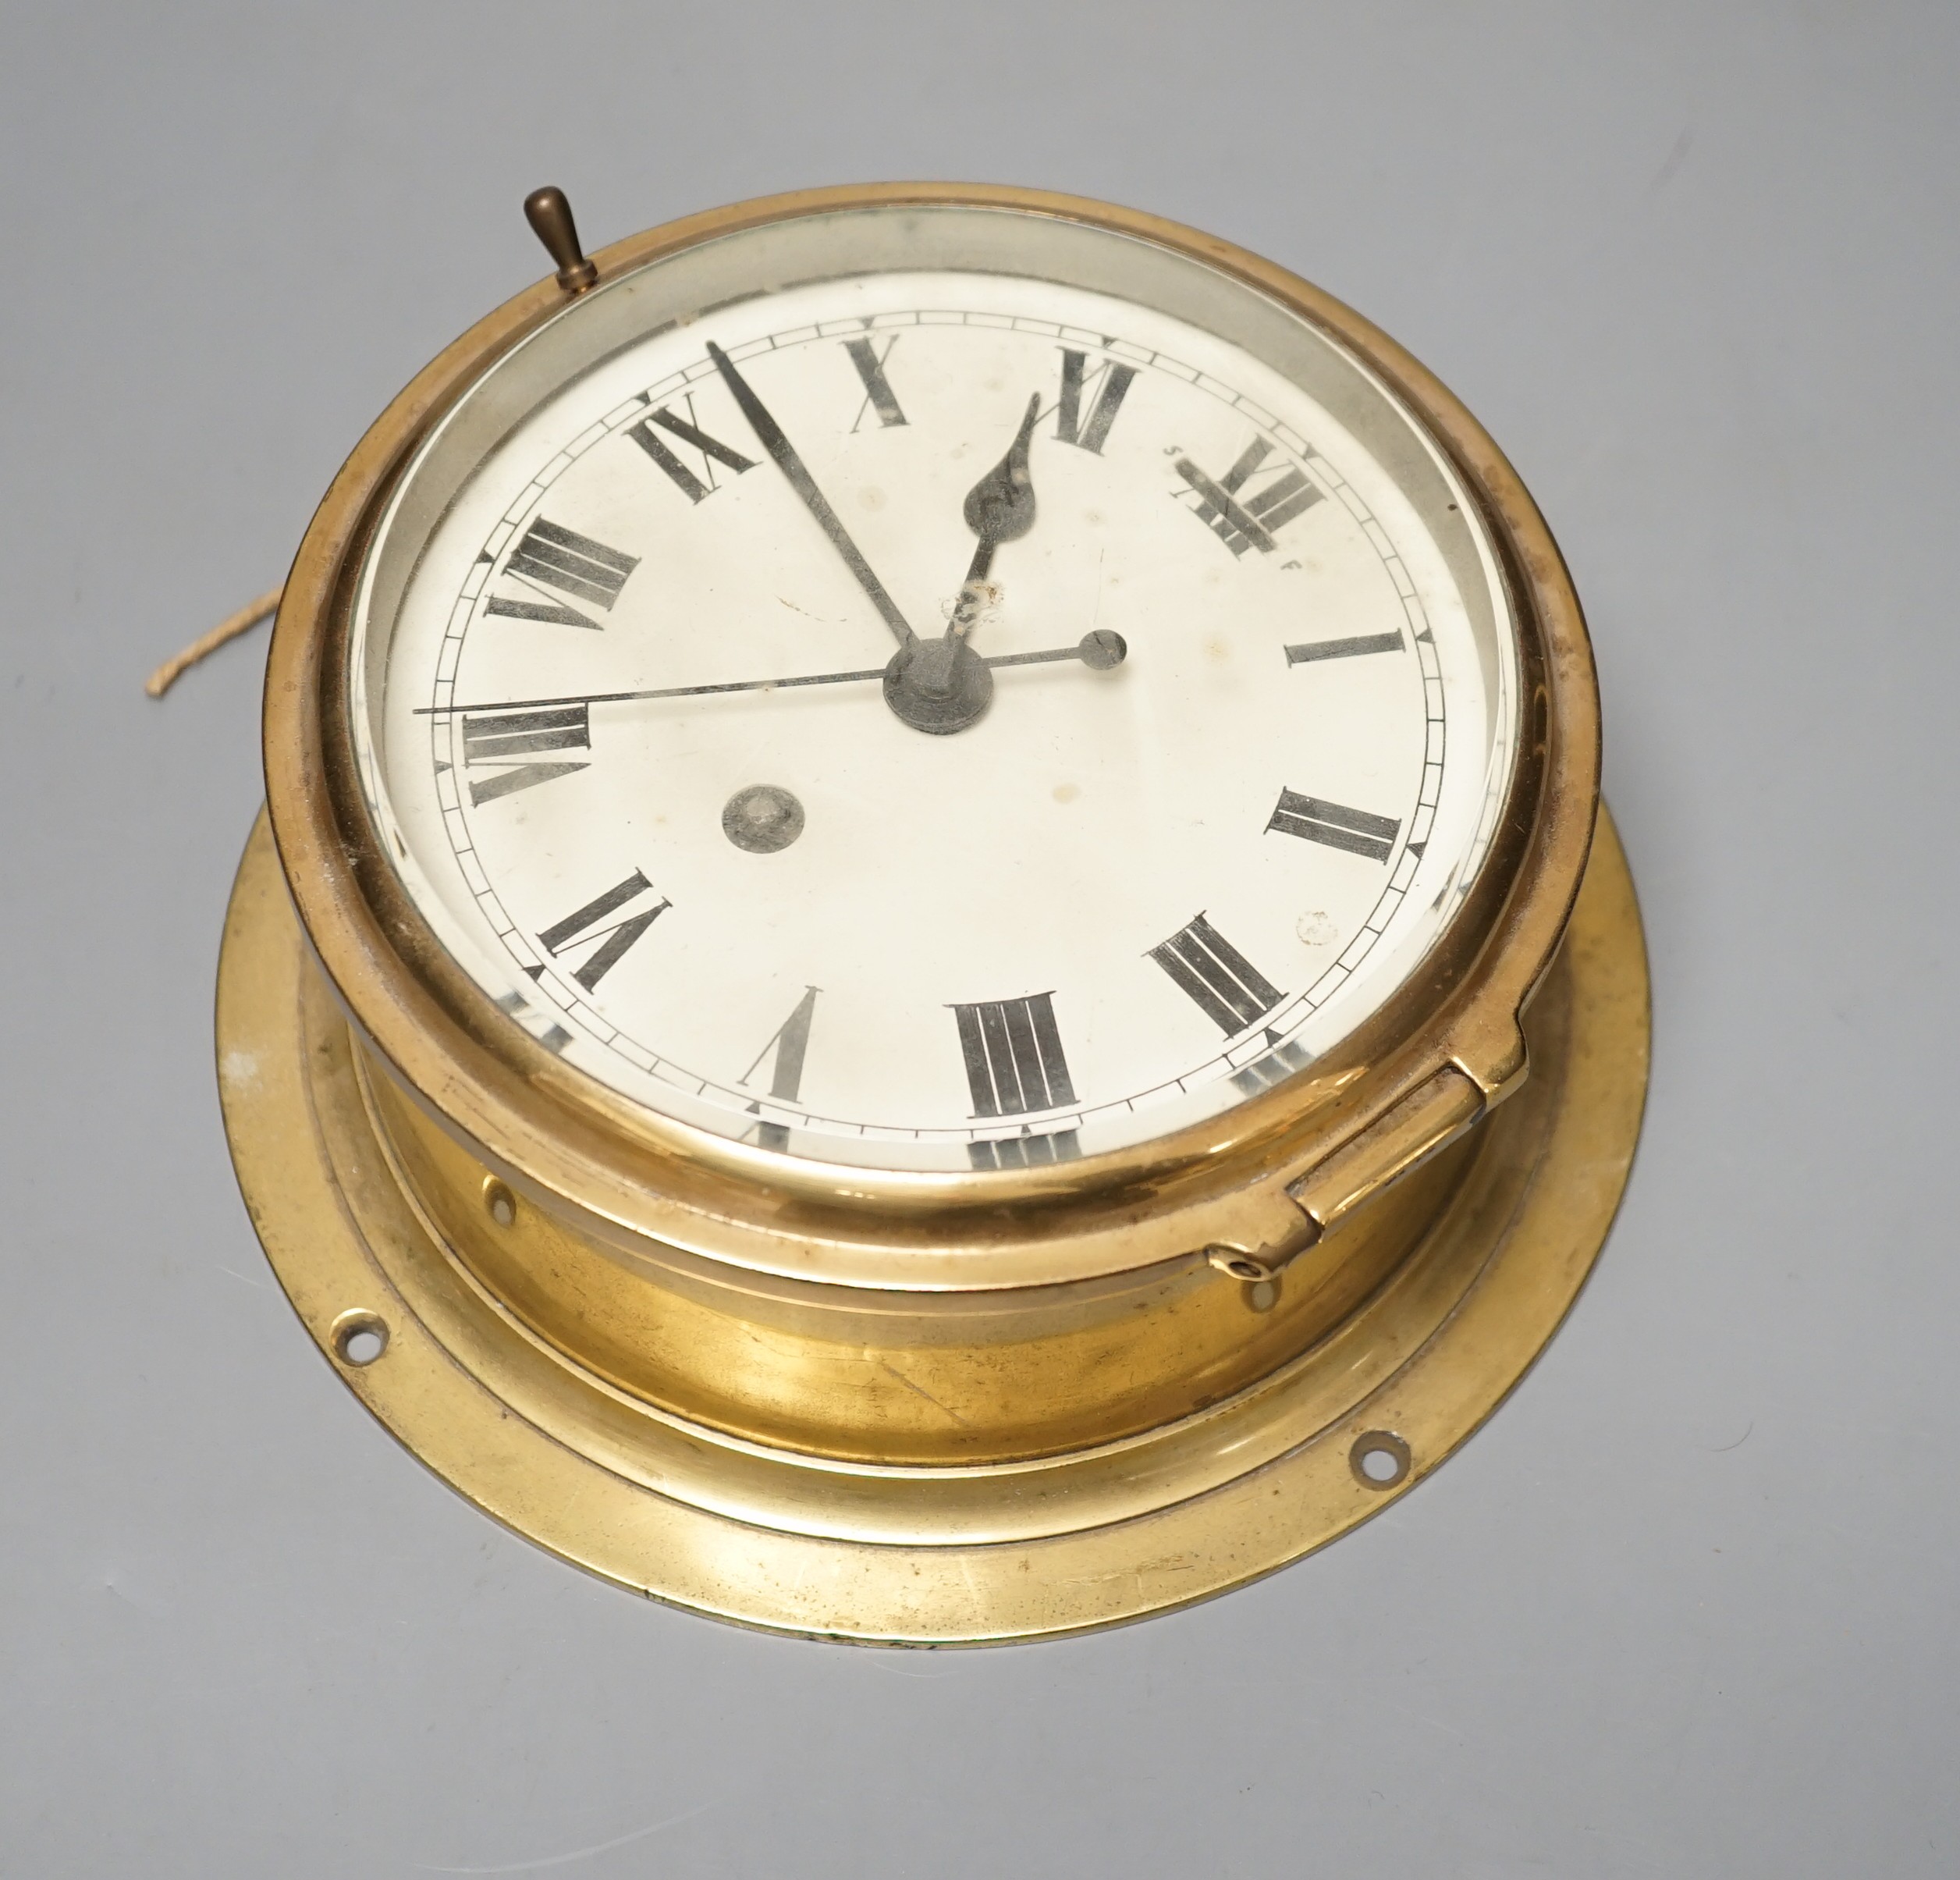 An early 20th century brass ships bulkhead timepiece with key